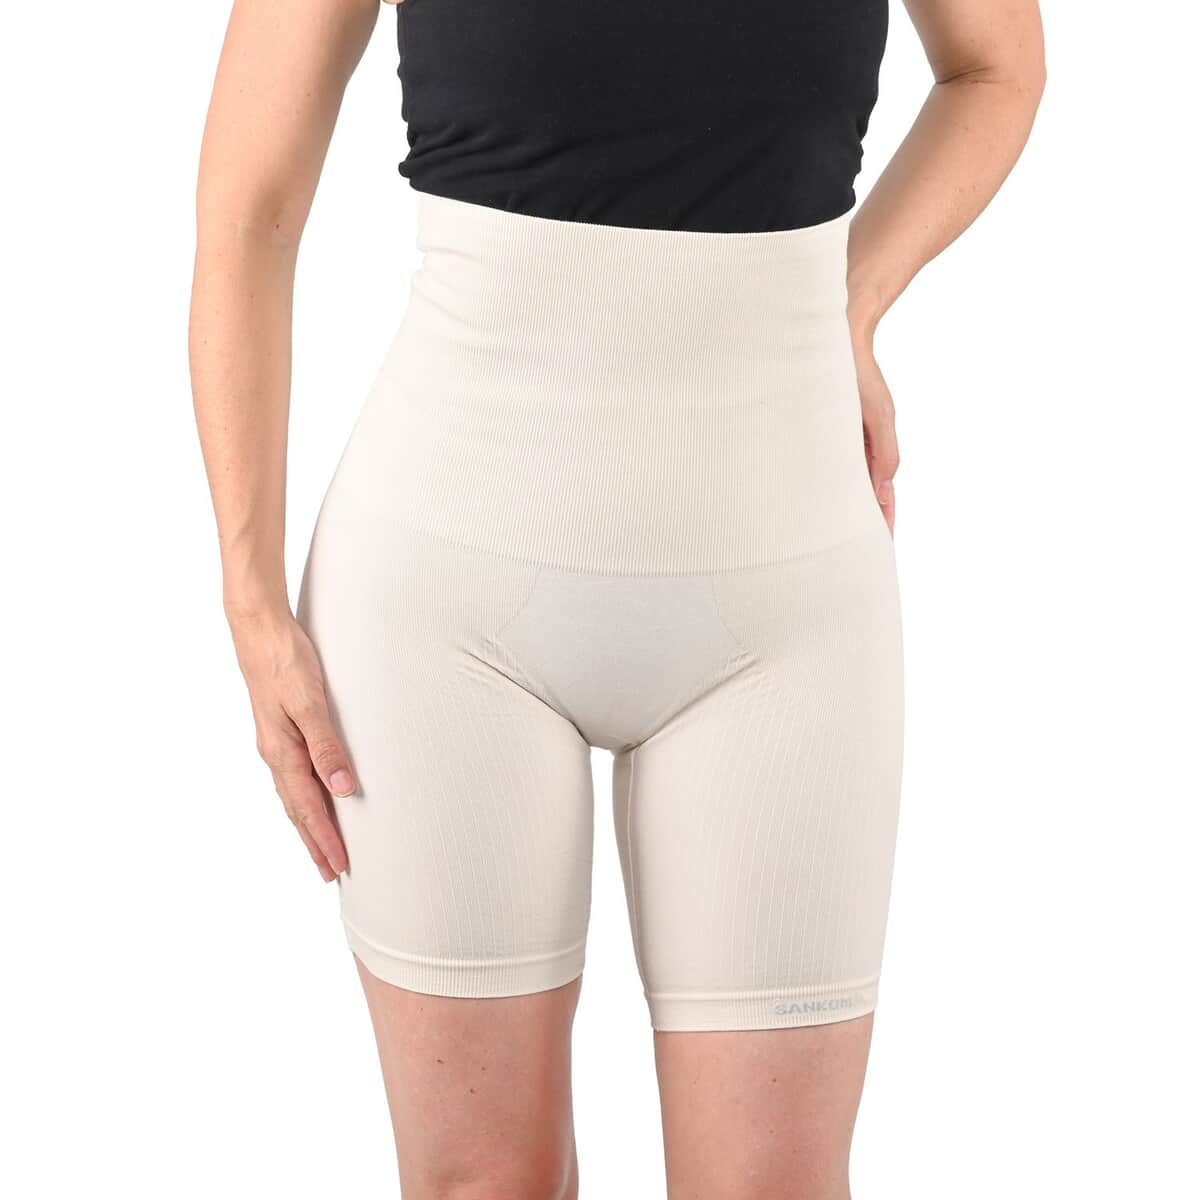 SANKOM Patent Organic Cotton Mid-Thigh Shapers - S/M | White image number 0